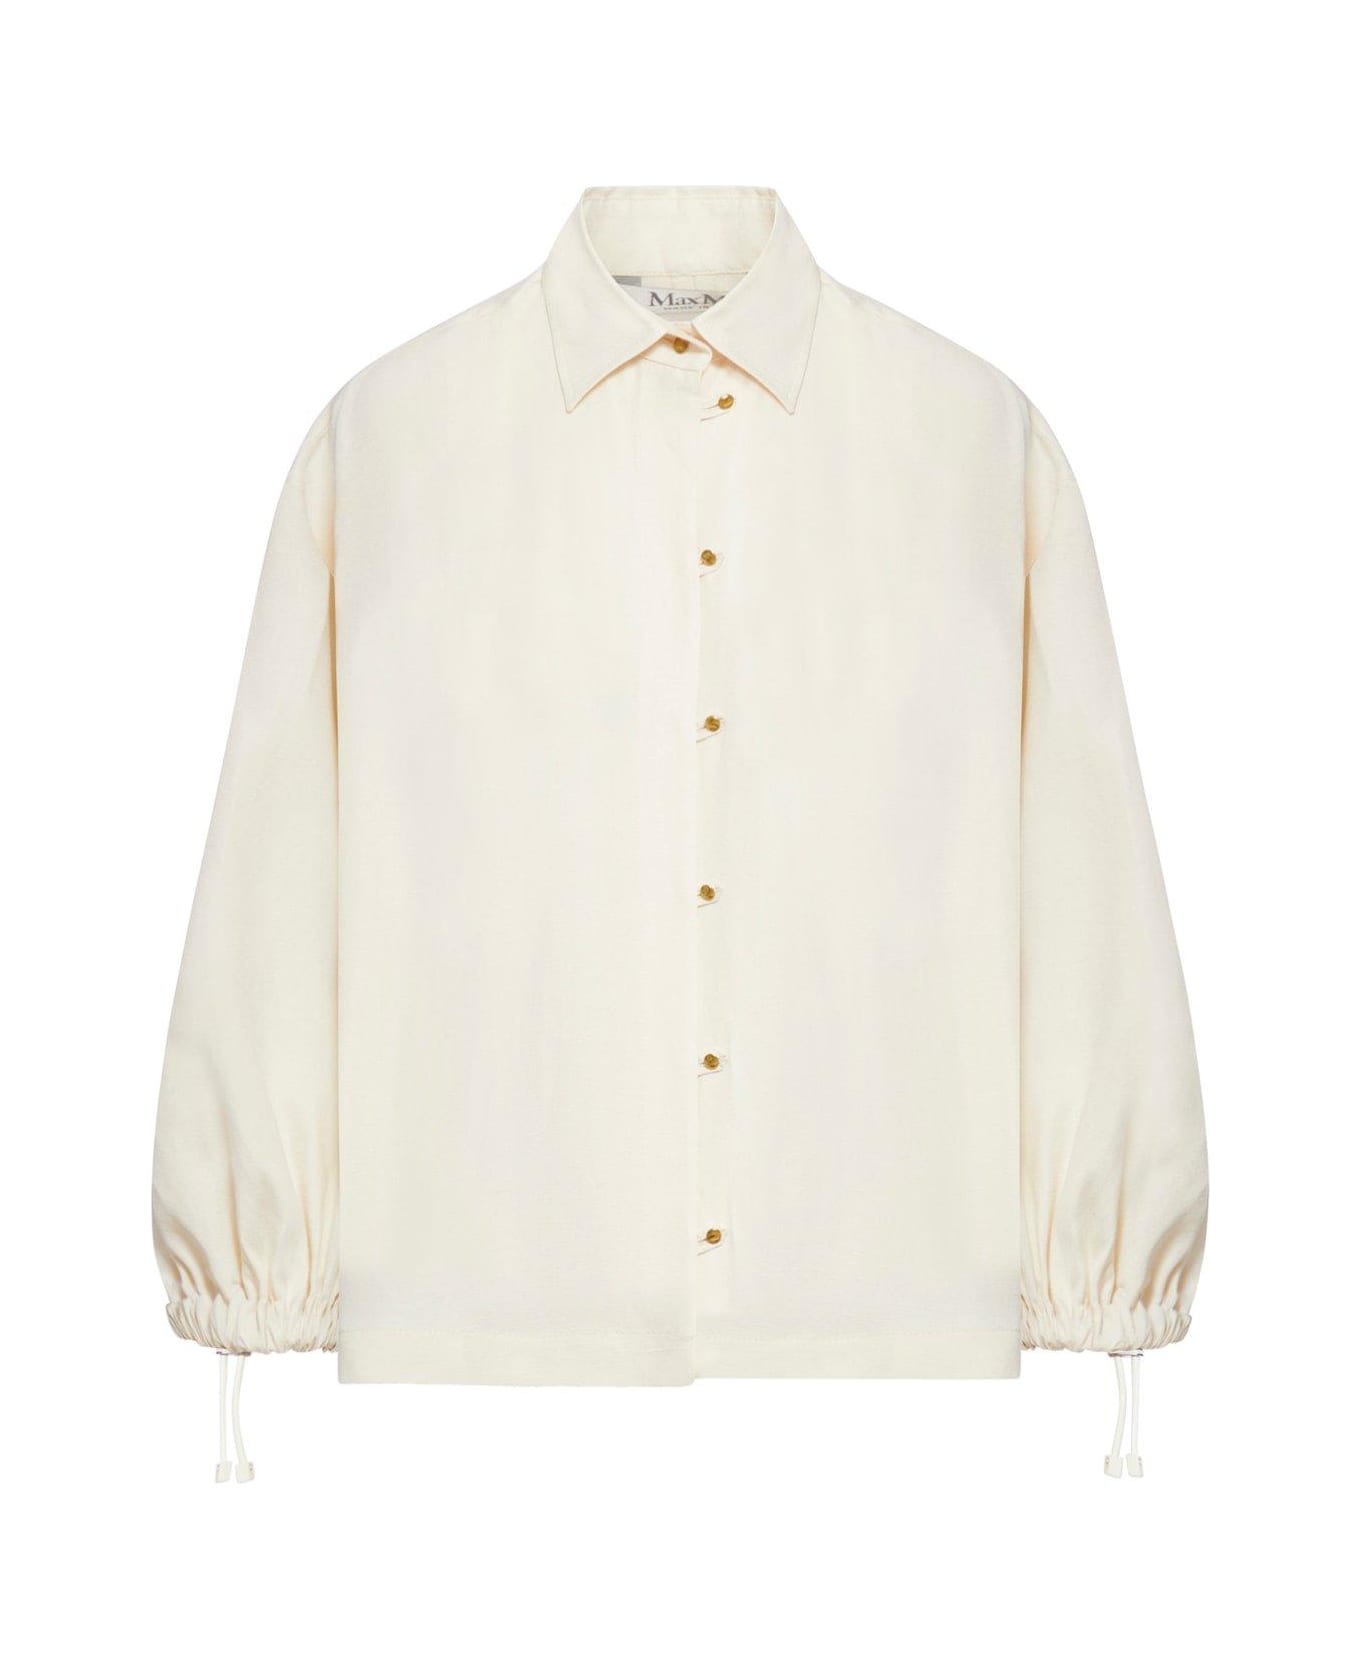 Max Mara Buttoned Long-sleeved Top - White Ivory シャツ